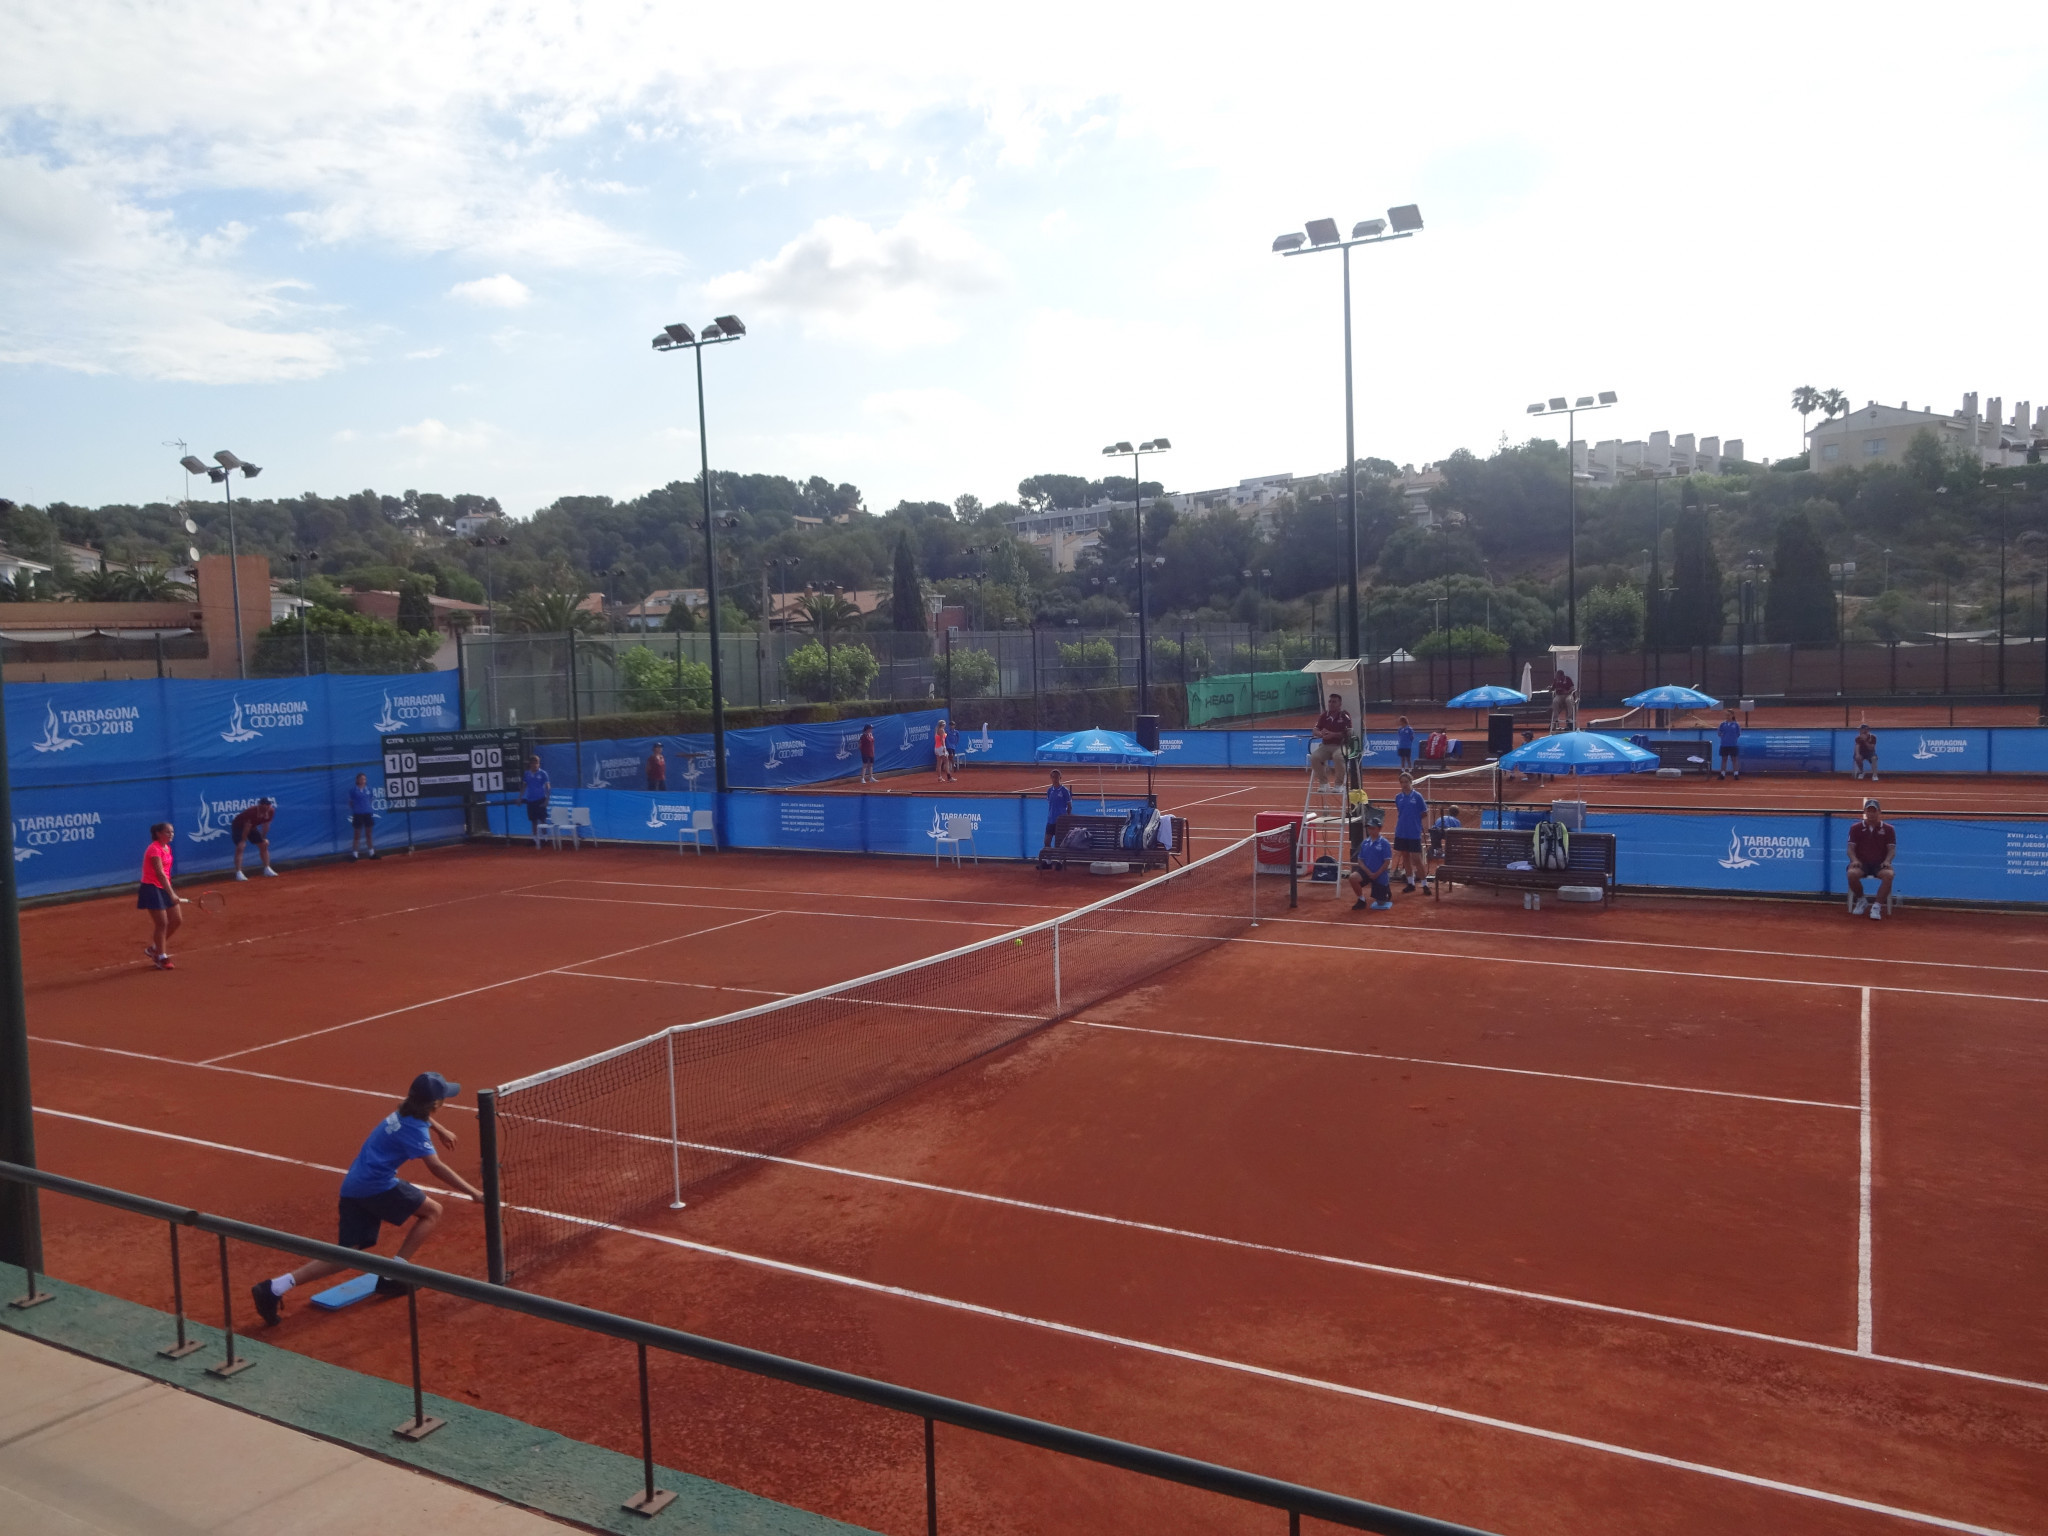 Tarragona 2018 tennis is being played on red clay courts ©ITG